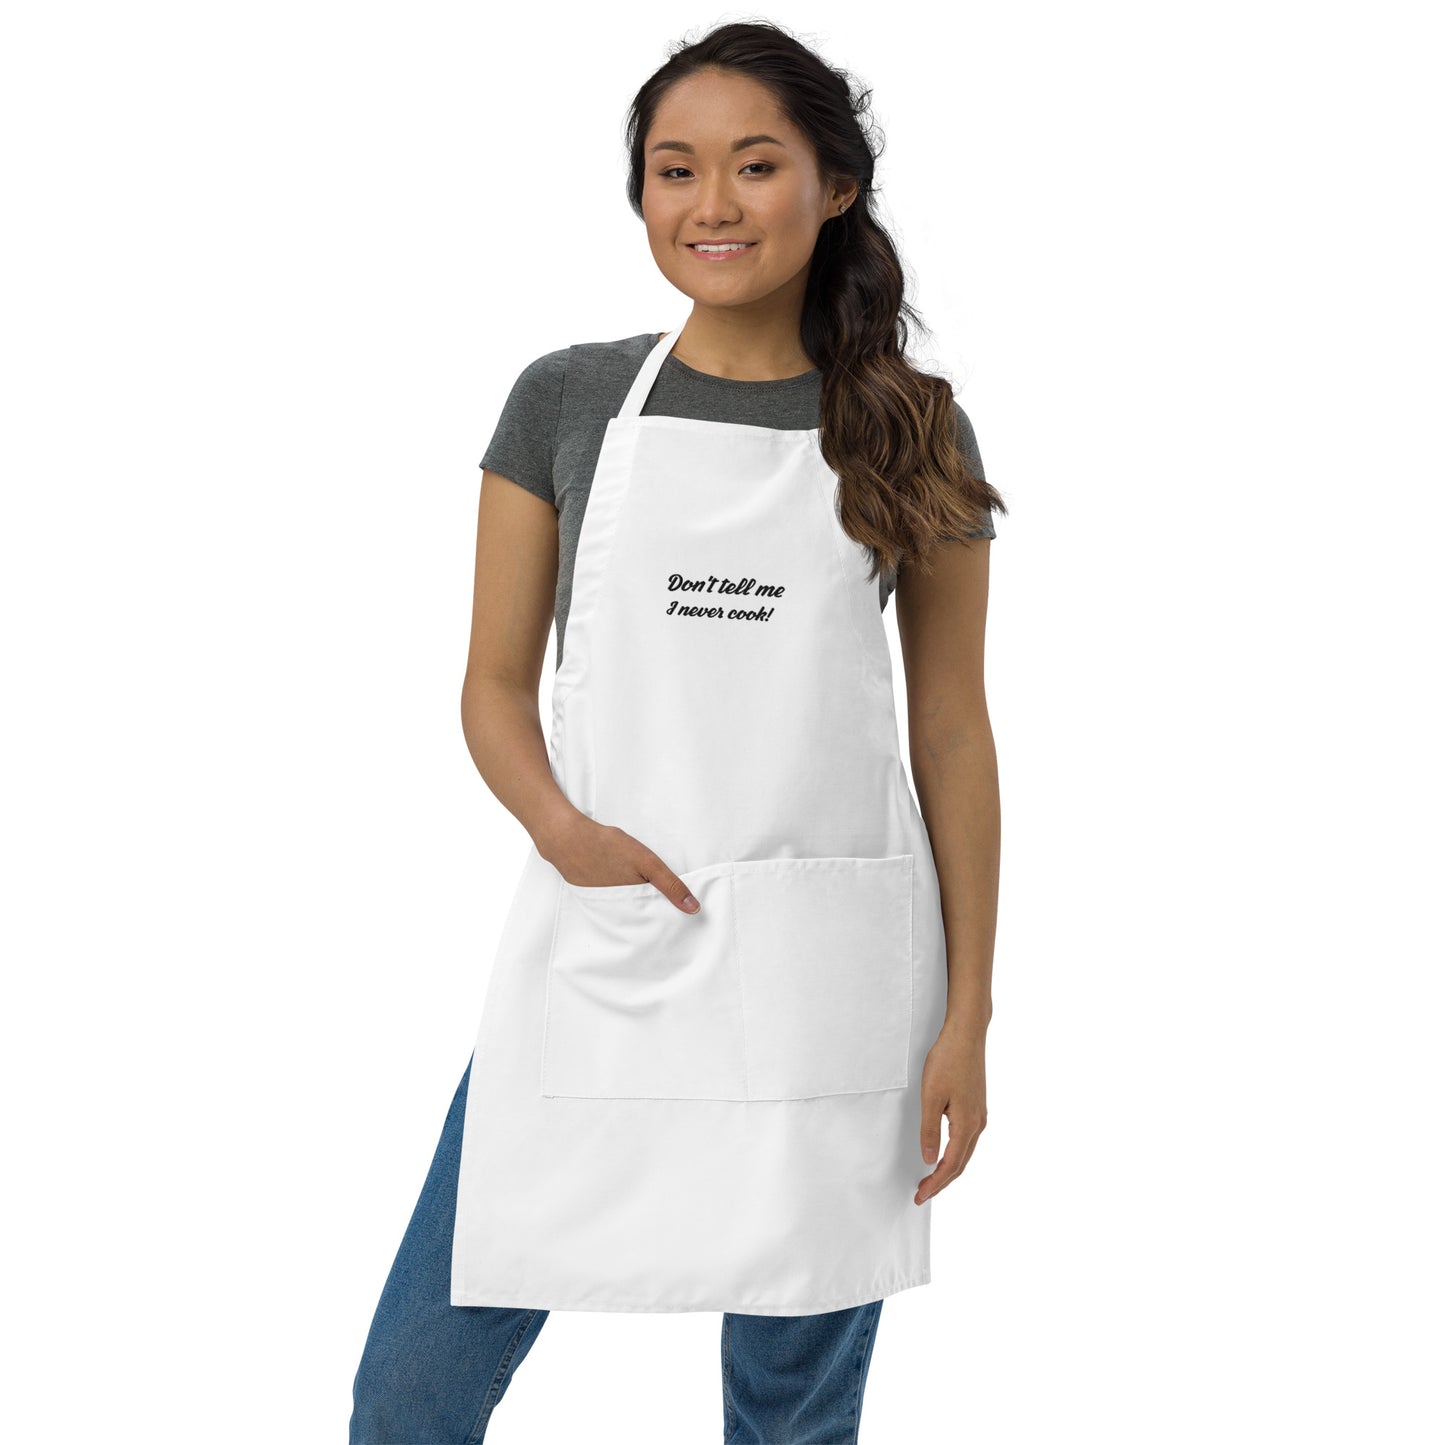 Don't Tell Me I Never Cook! Embroidered Apron